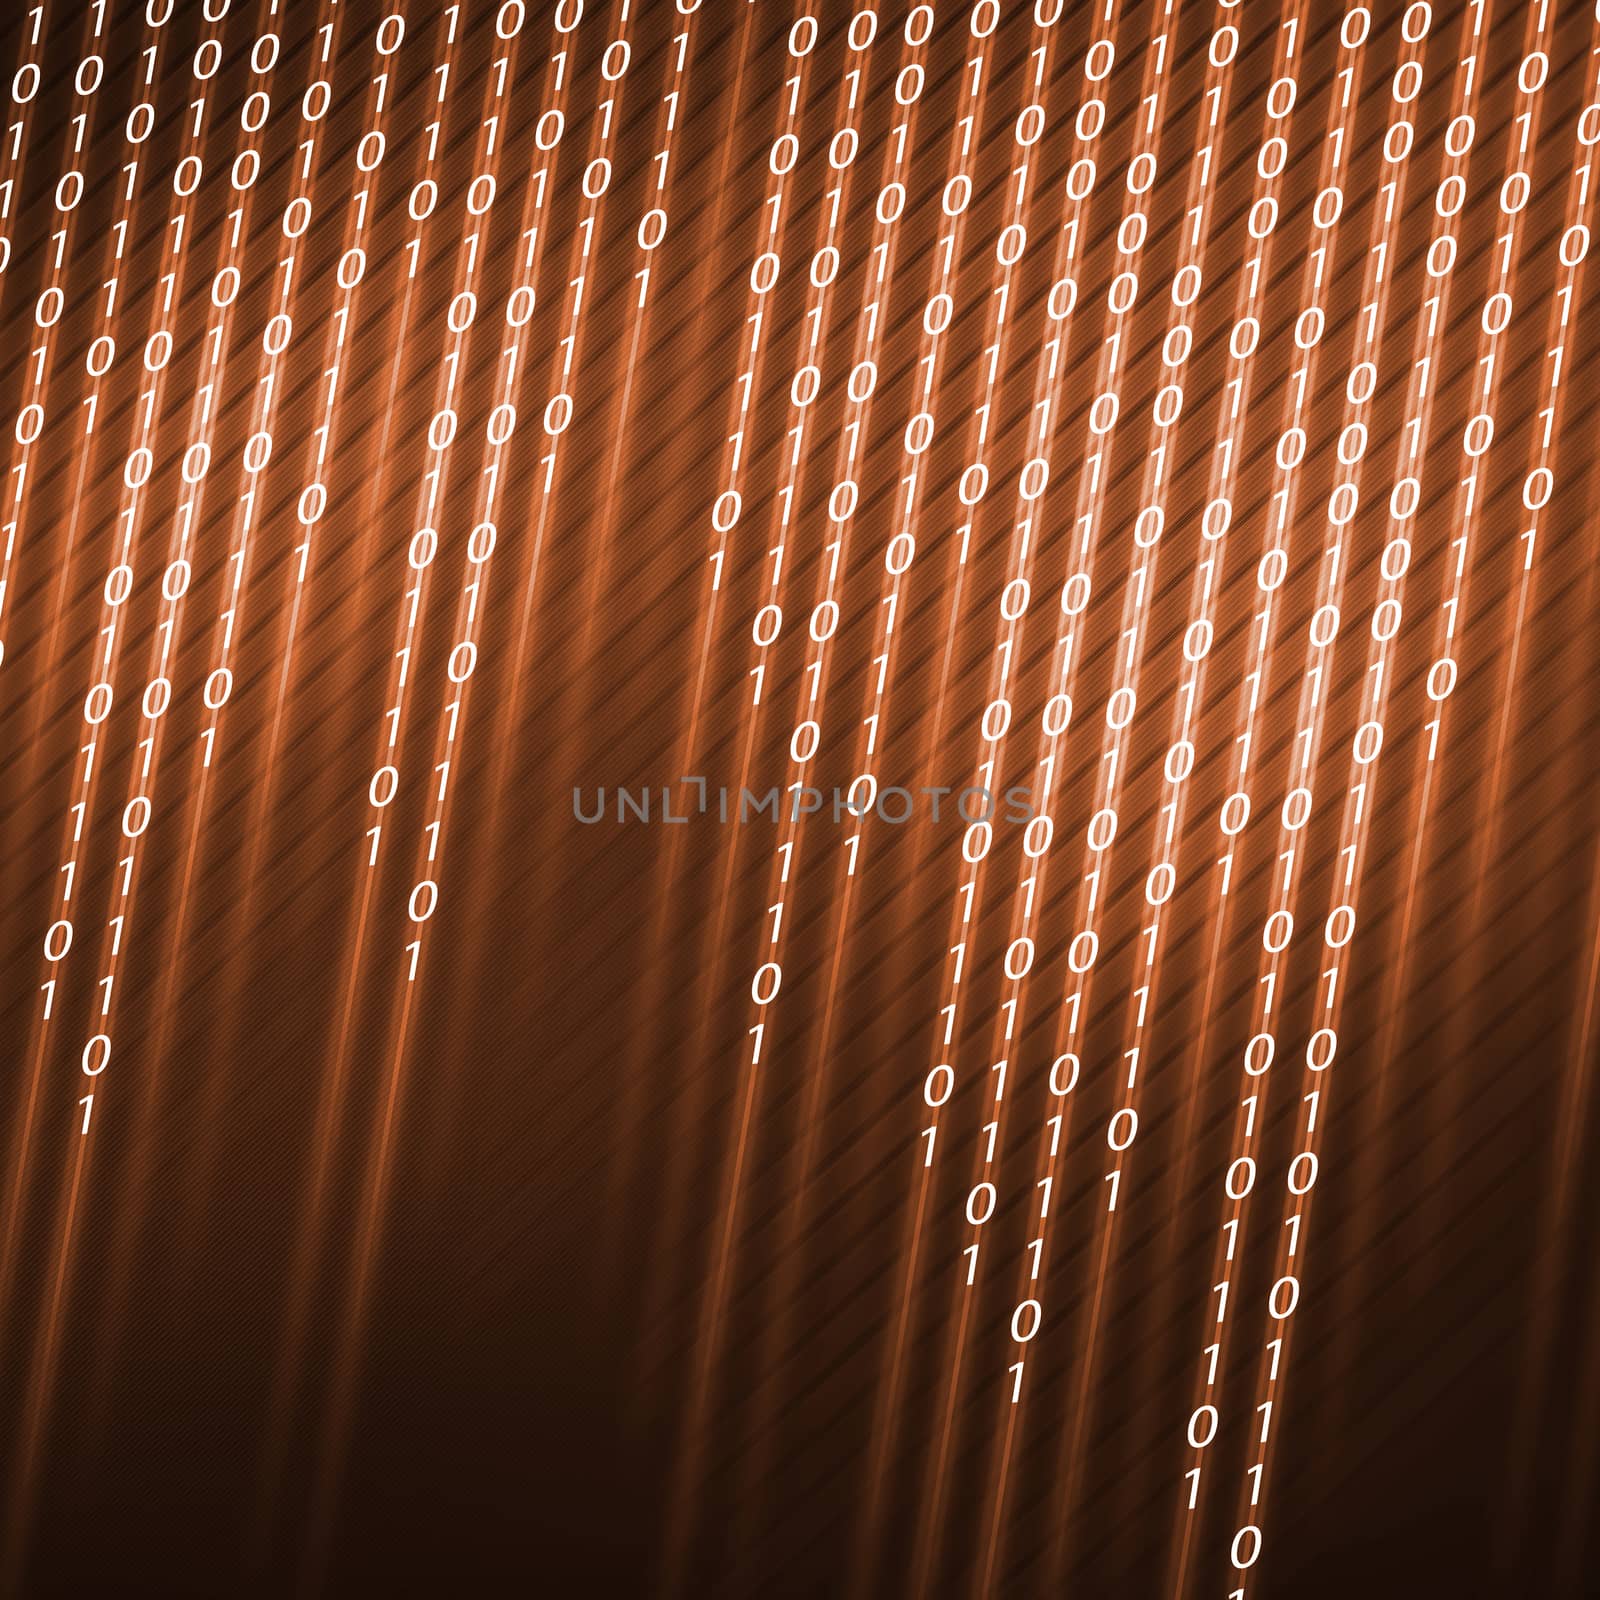 Conceptual background image with binary code. Safety concept